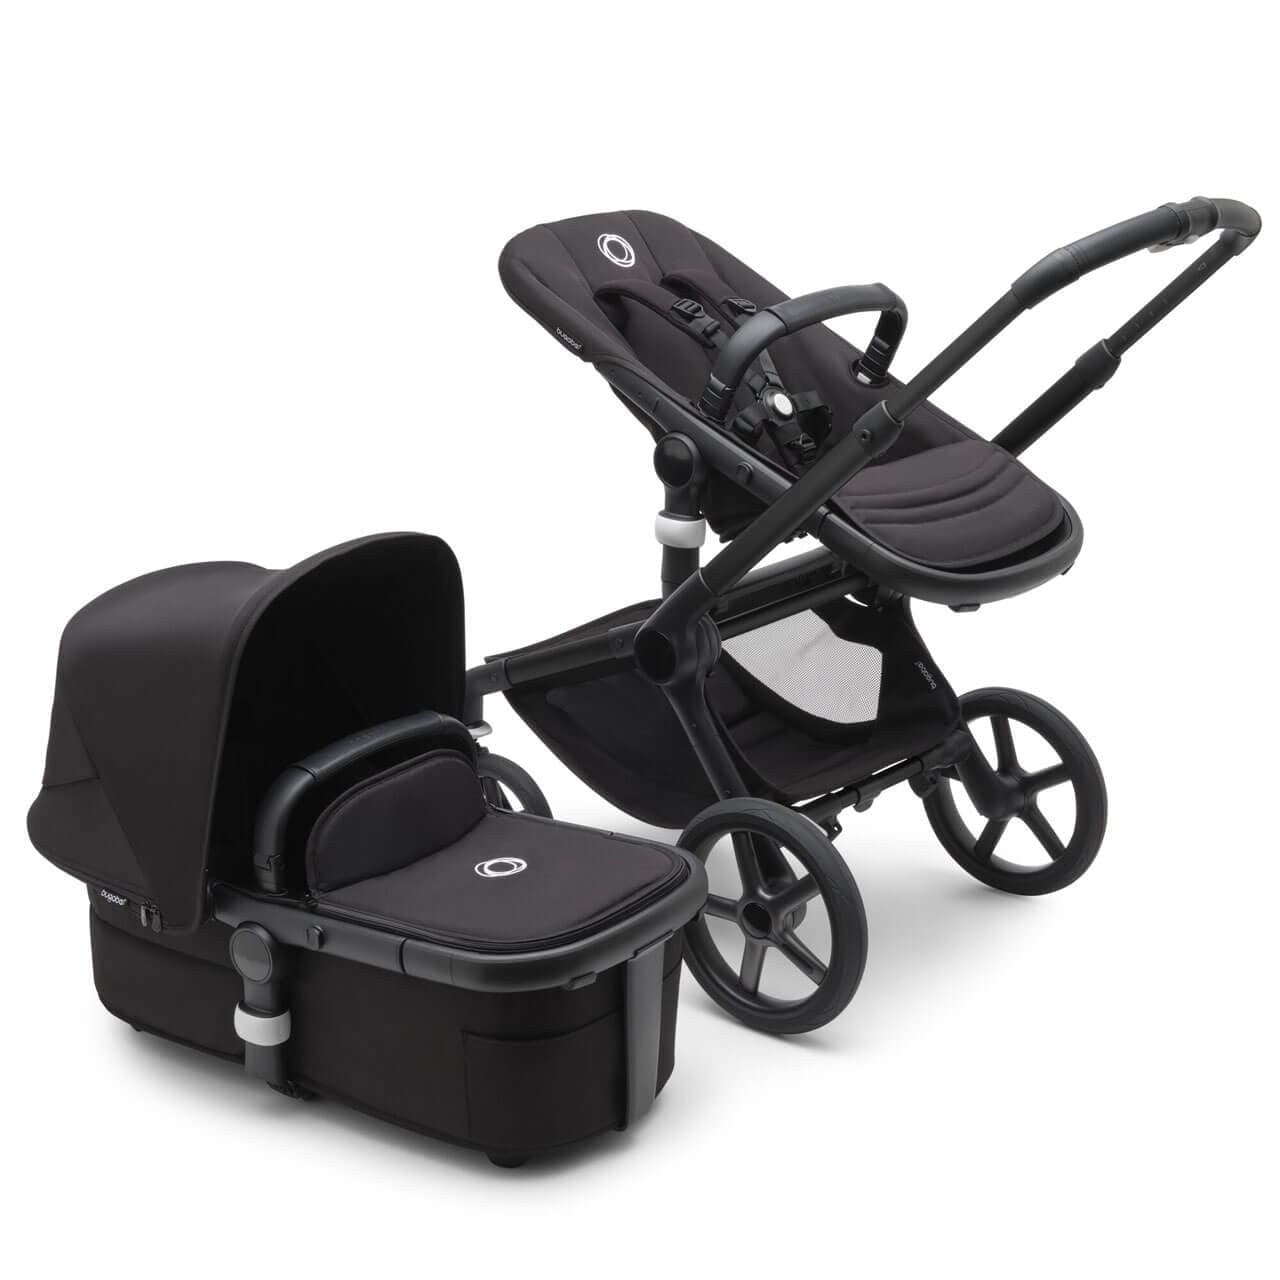 Bugaboo Fox 5 Ultimate Travel System Bundle - Black/Midnight Black - For Your Little One